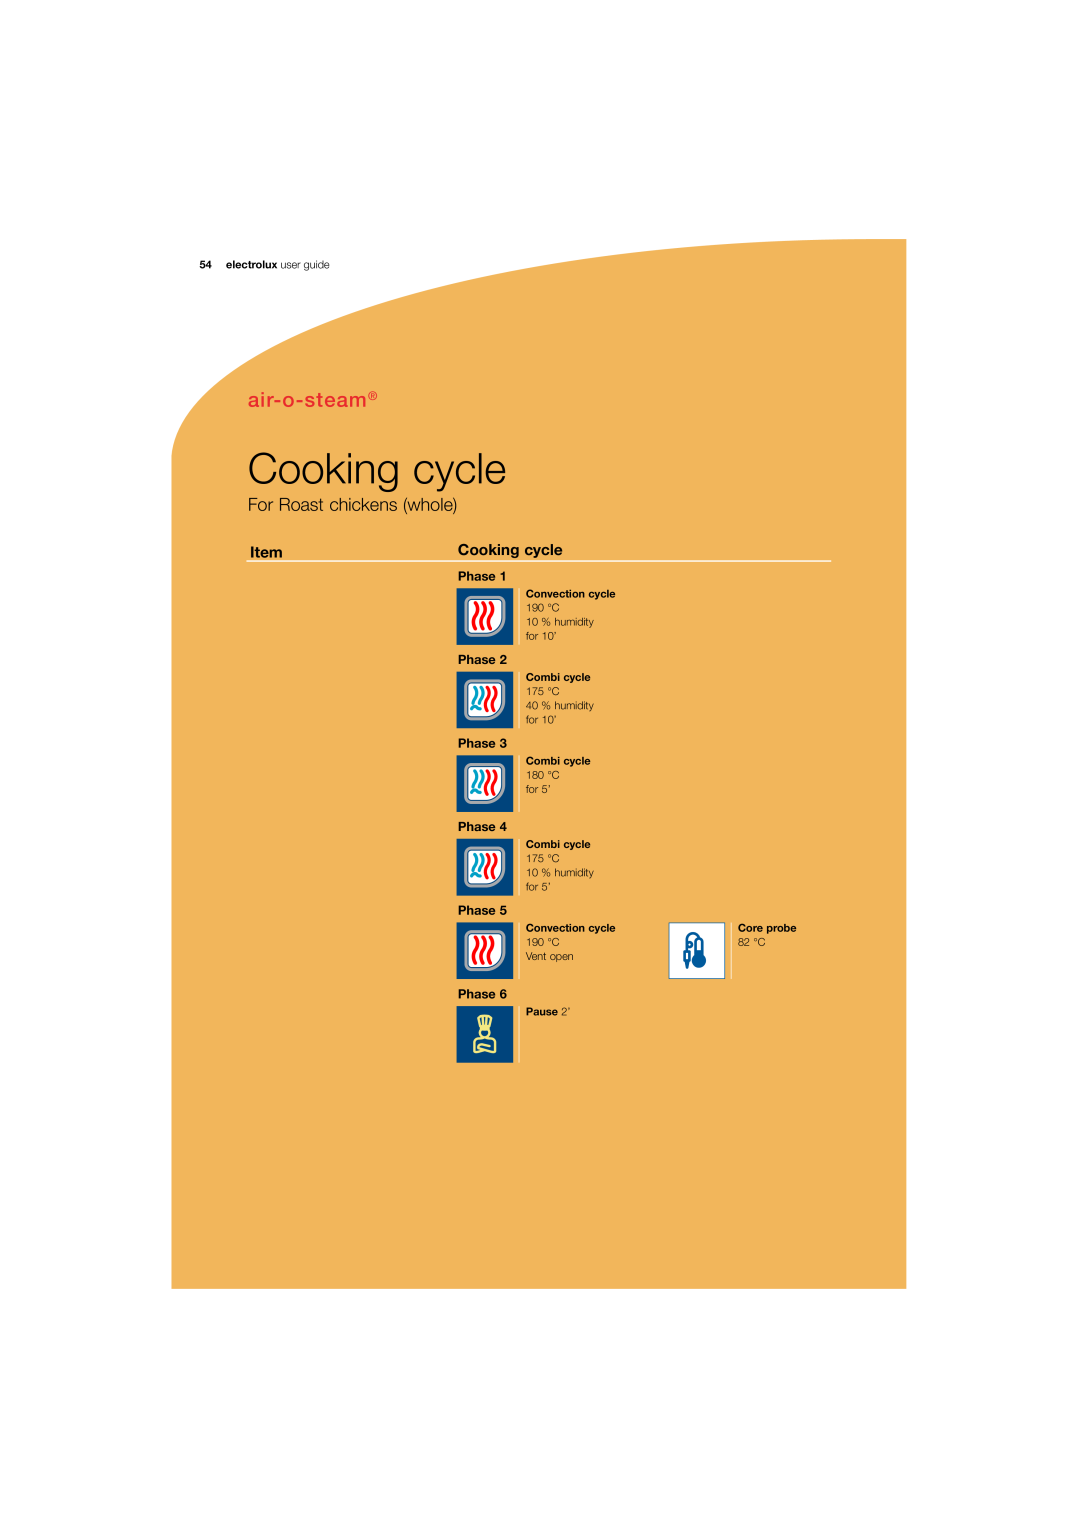 Electrolux 180 Cooking cycle, air-o-steam, For Roast chickens whole, electrolux user guide, Convection cycle, Combi cycle 